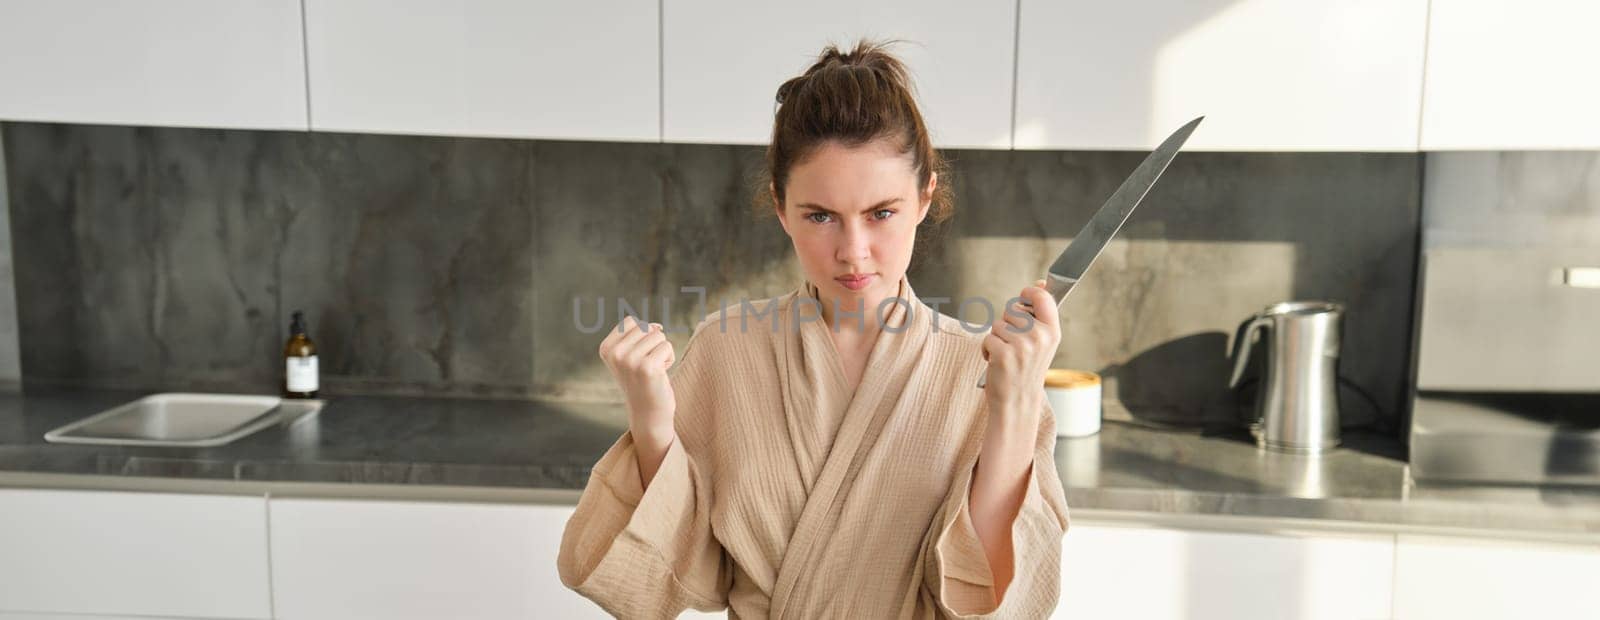 Close up of serious and confident brunette woman holds knife and clenches fist, standing in the kitchen, looking self-assured, posing in bathrobe. Lifestyle and food preparation concept